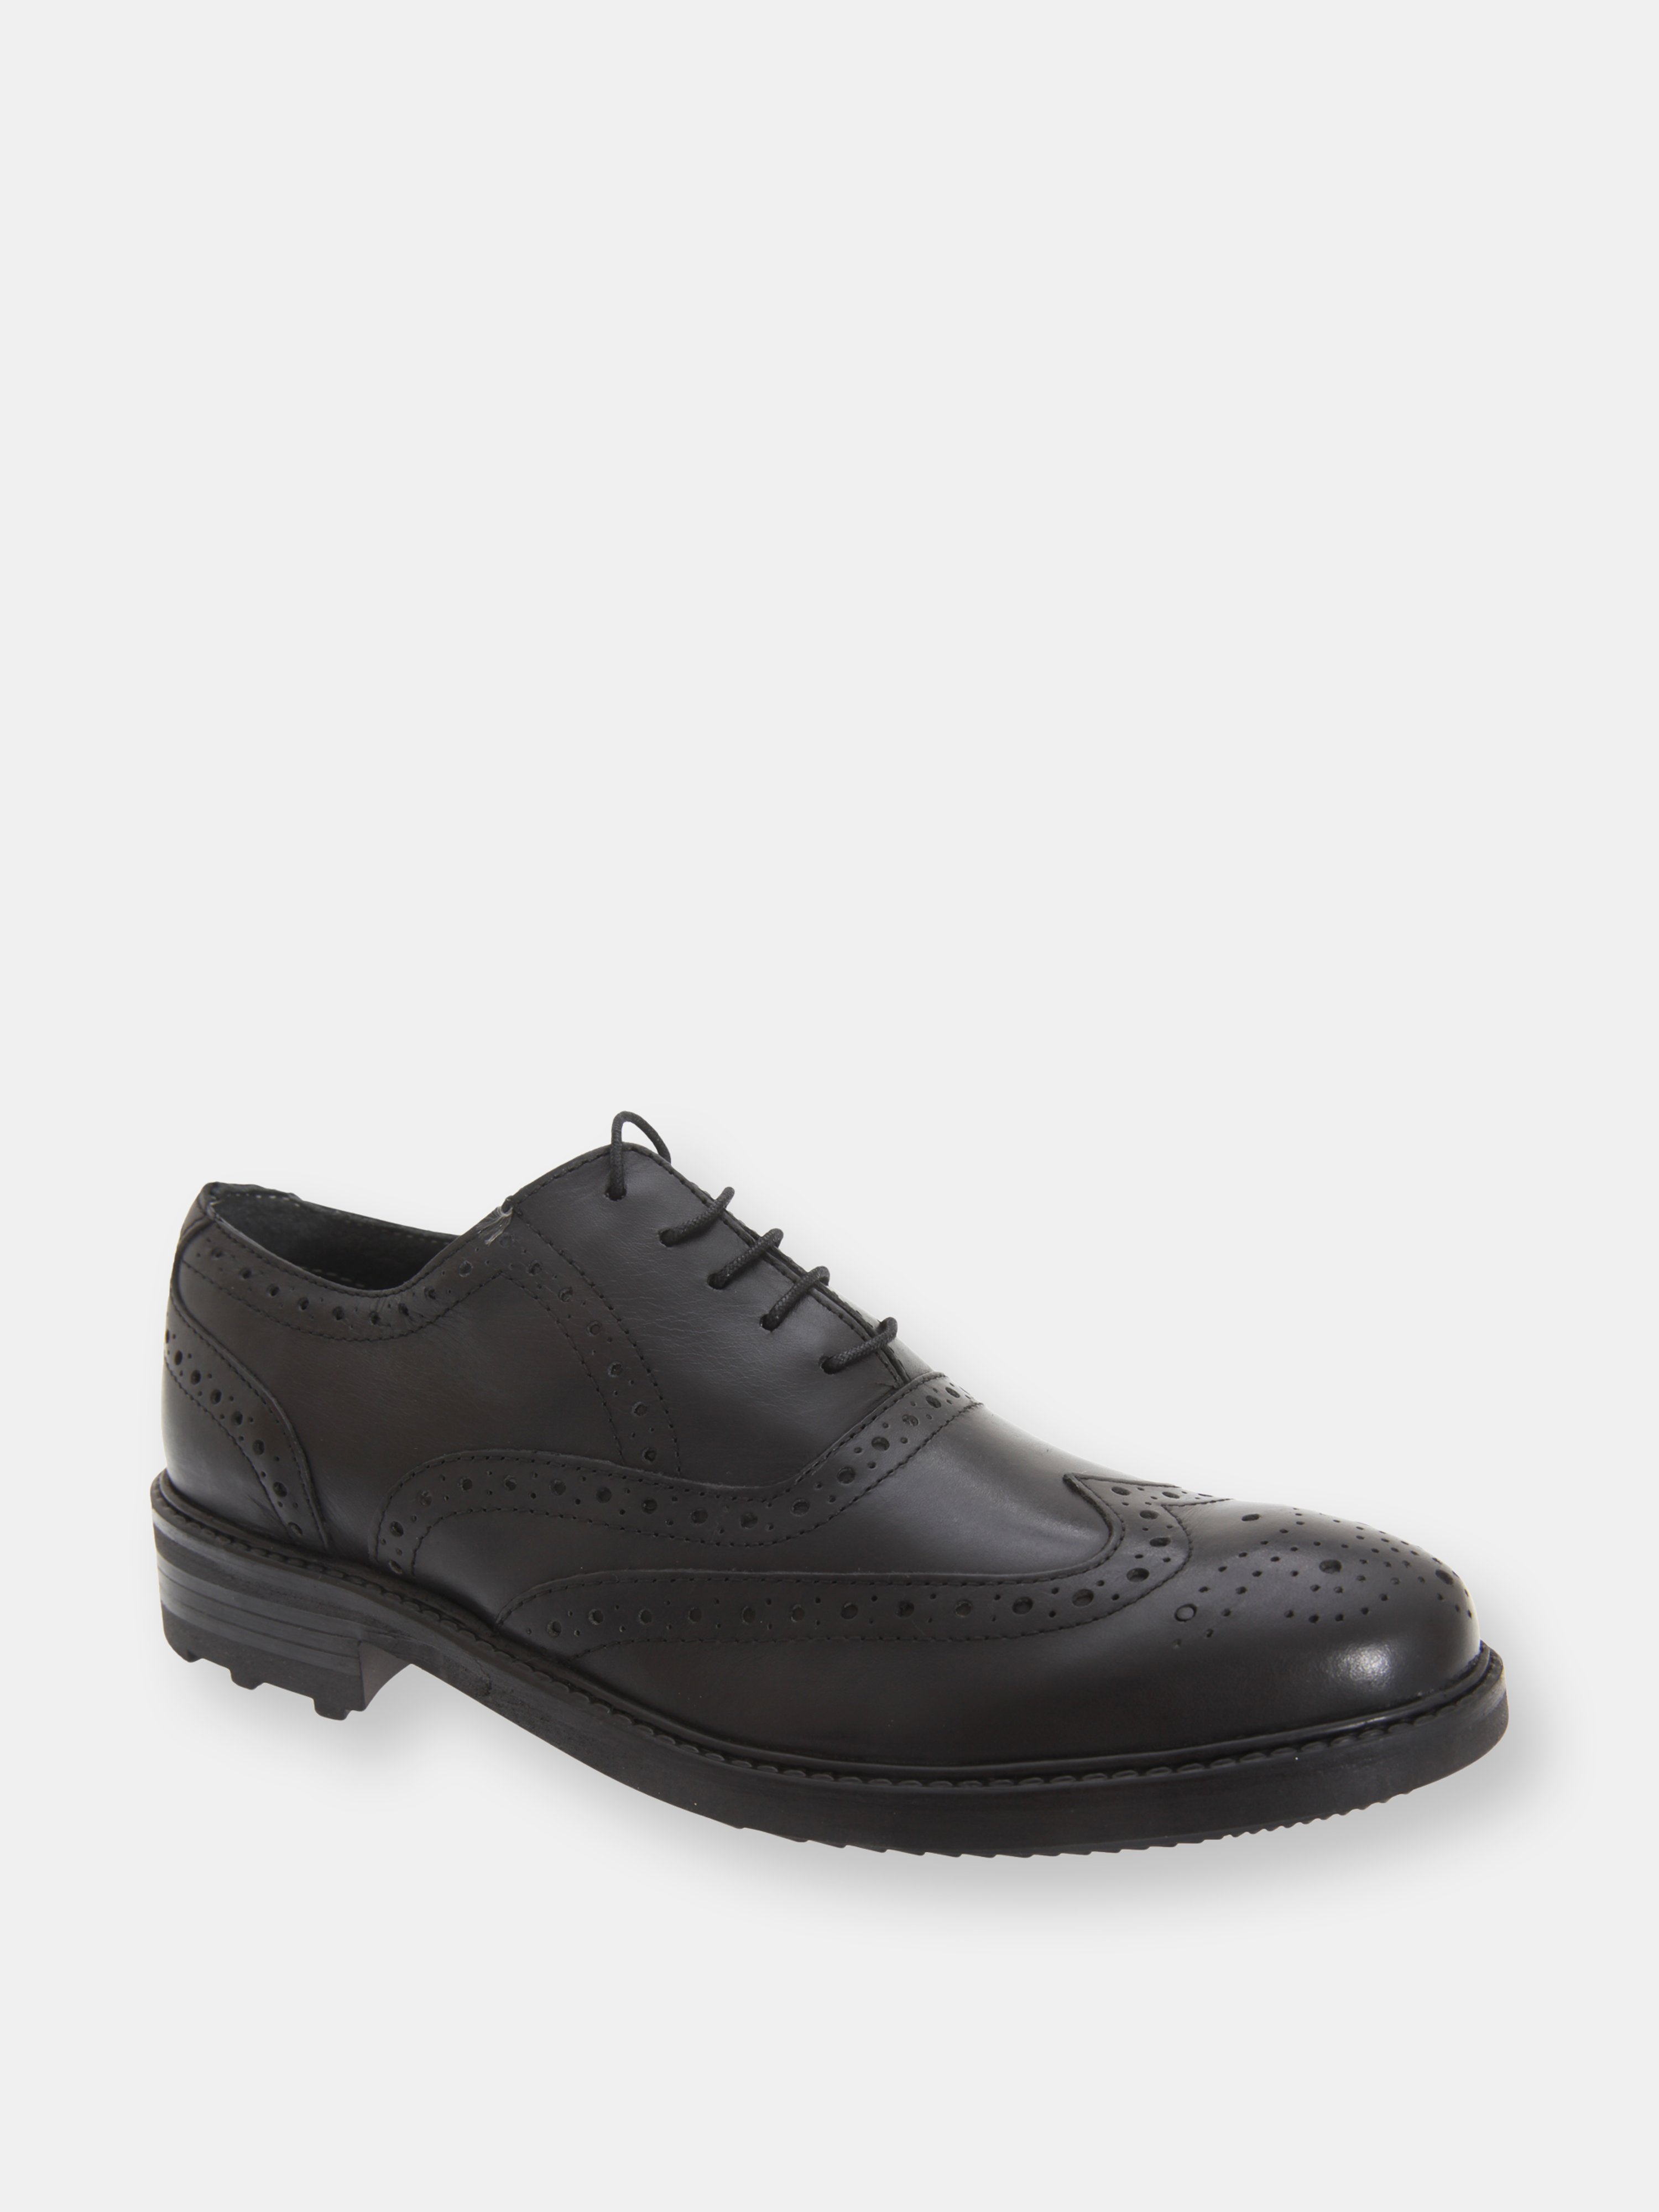 ROAMERS ROAMERS MENS 5 EYELET BROGUE OXFORD LEATHER SHOES